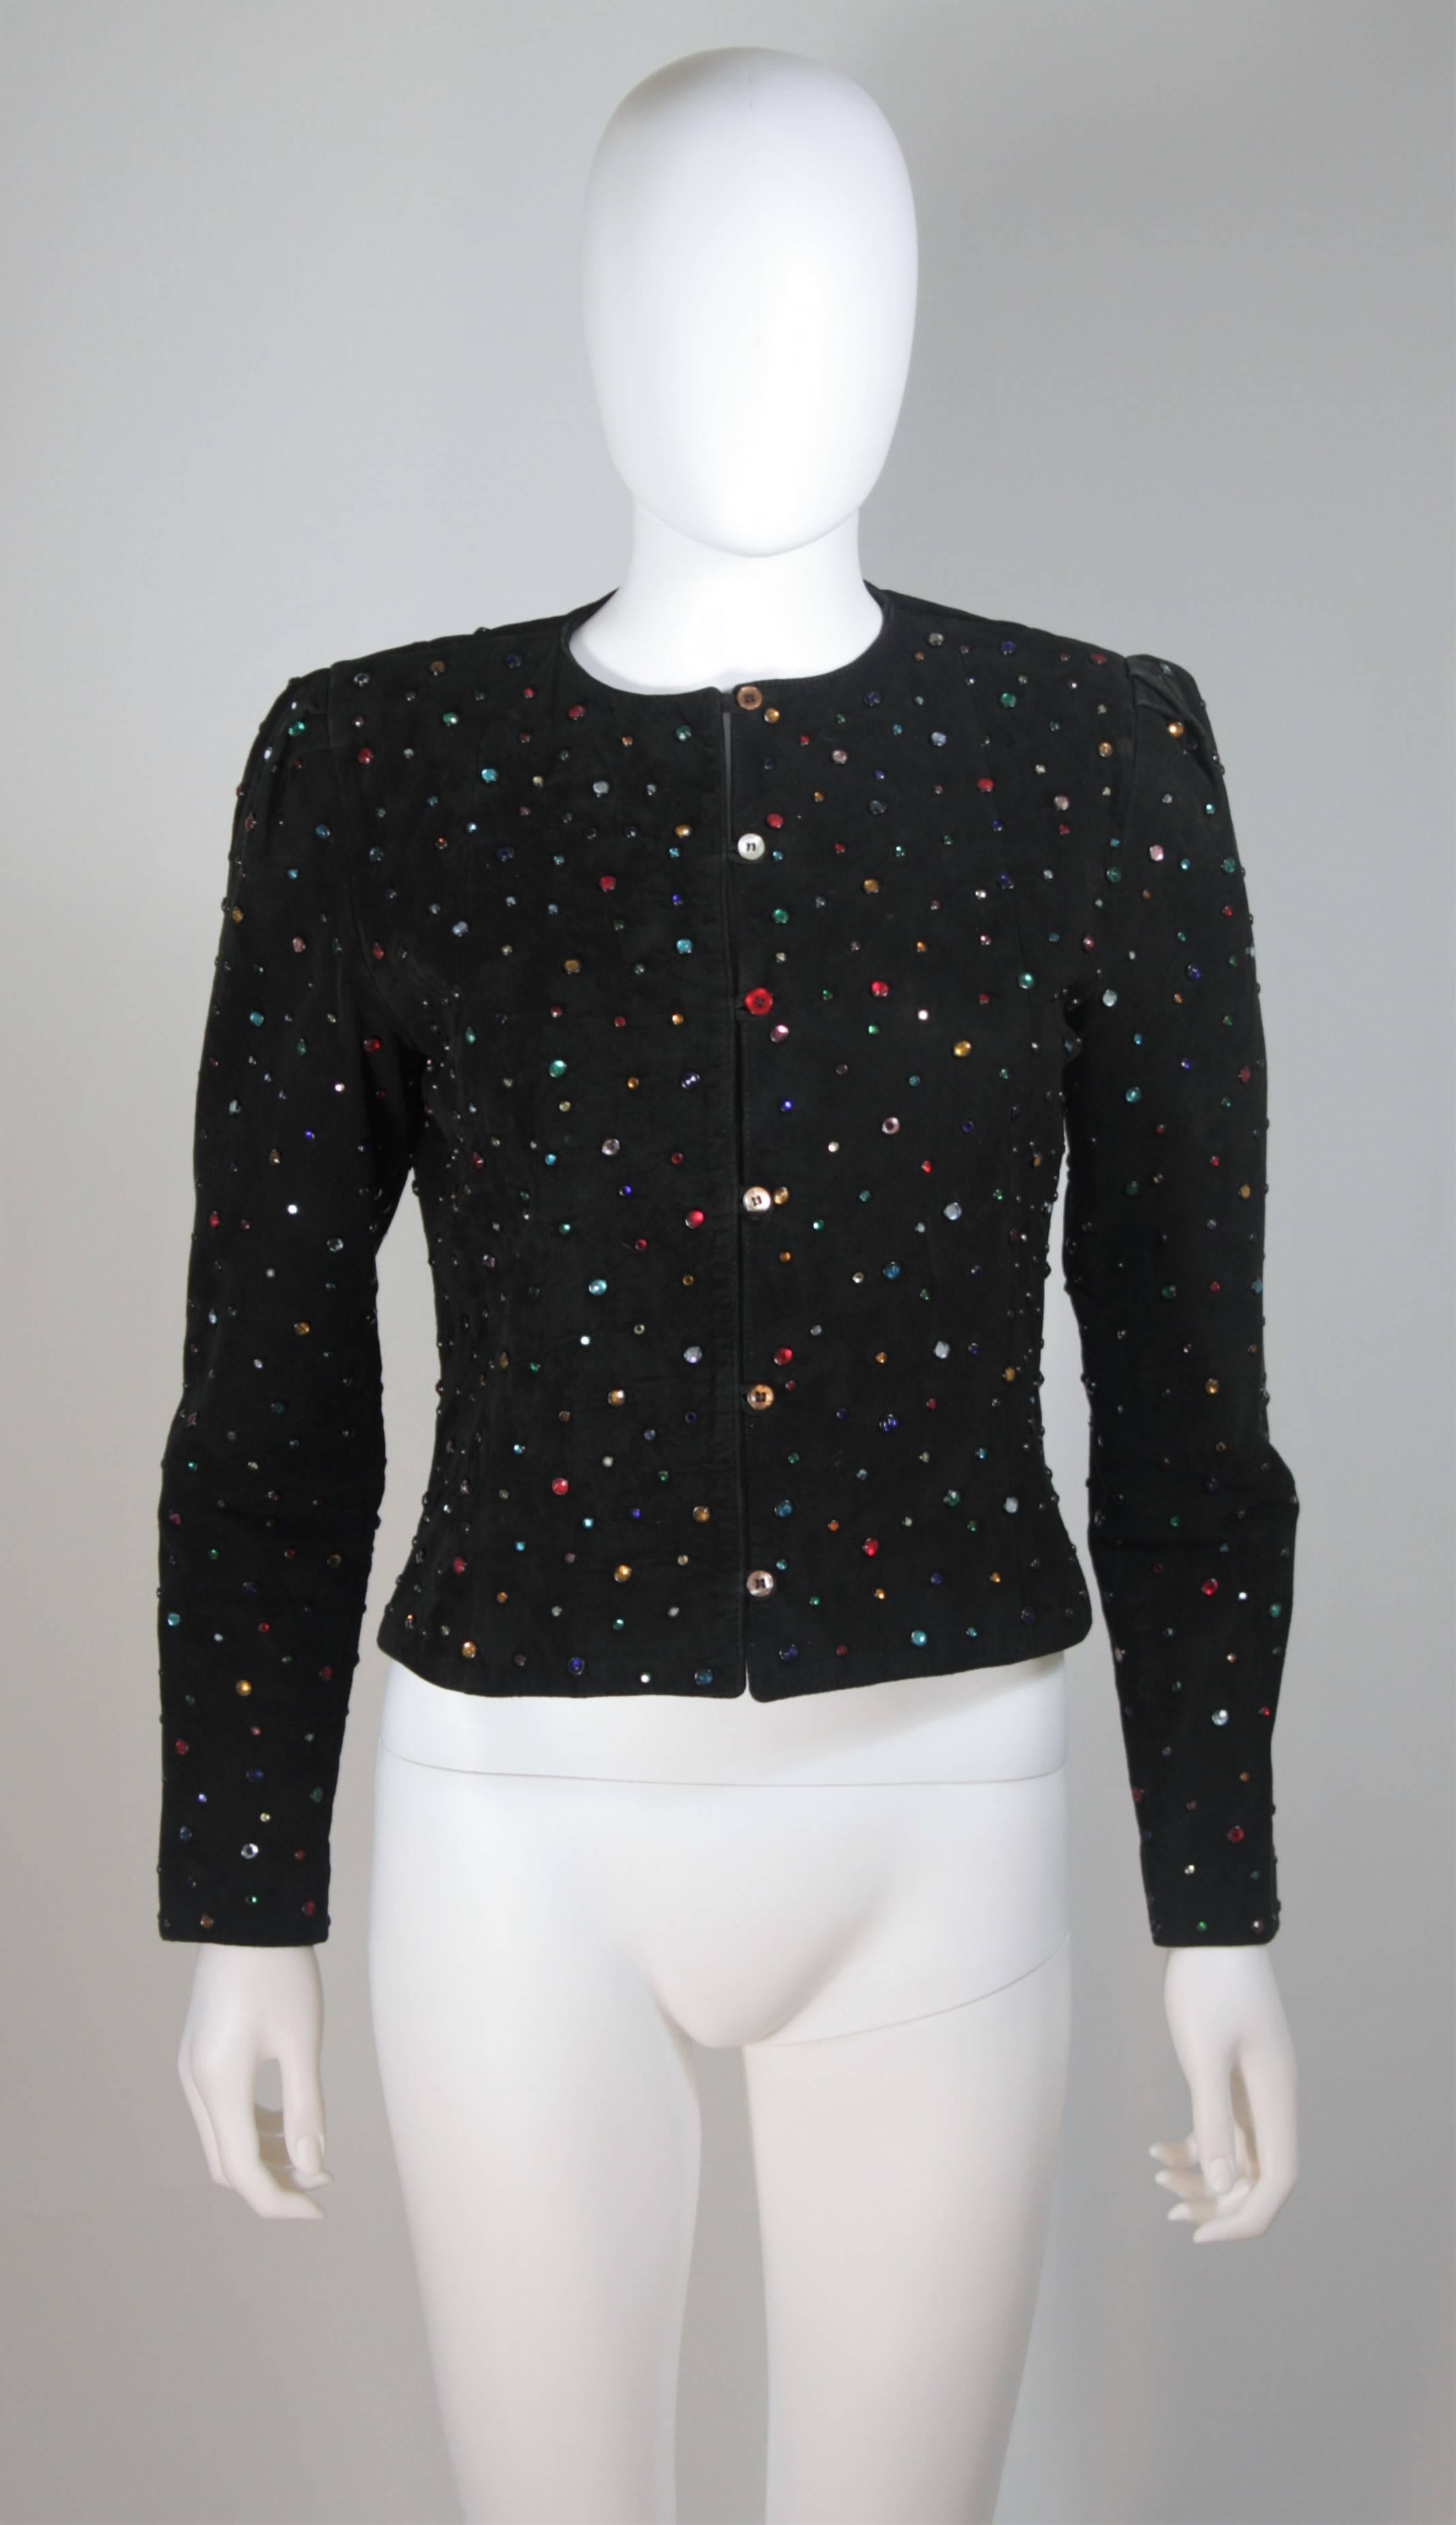  This jacket is composed of a black suede and features multi-color rhinestone applique. There are center front button closures. The shoulders features a gathered detail. In great vintage condition. 

  **Please cross-reference measurements for